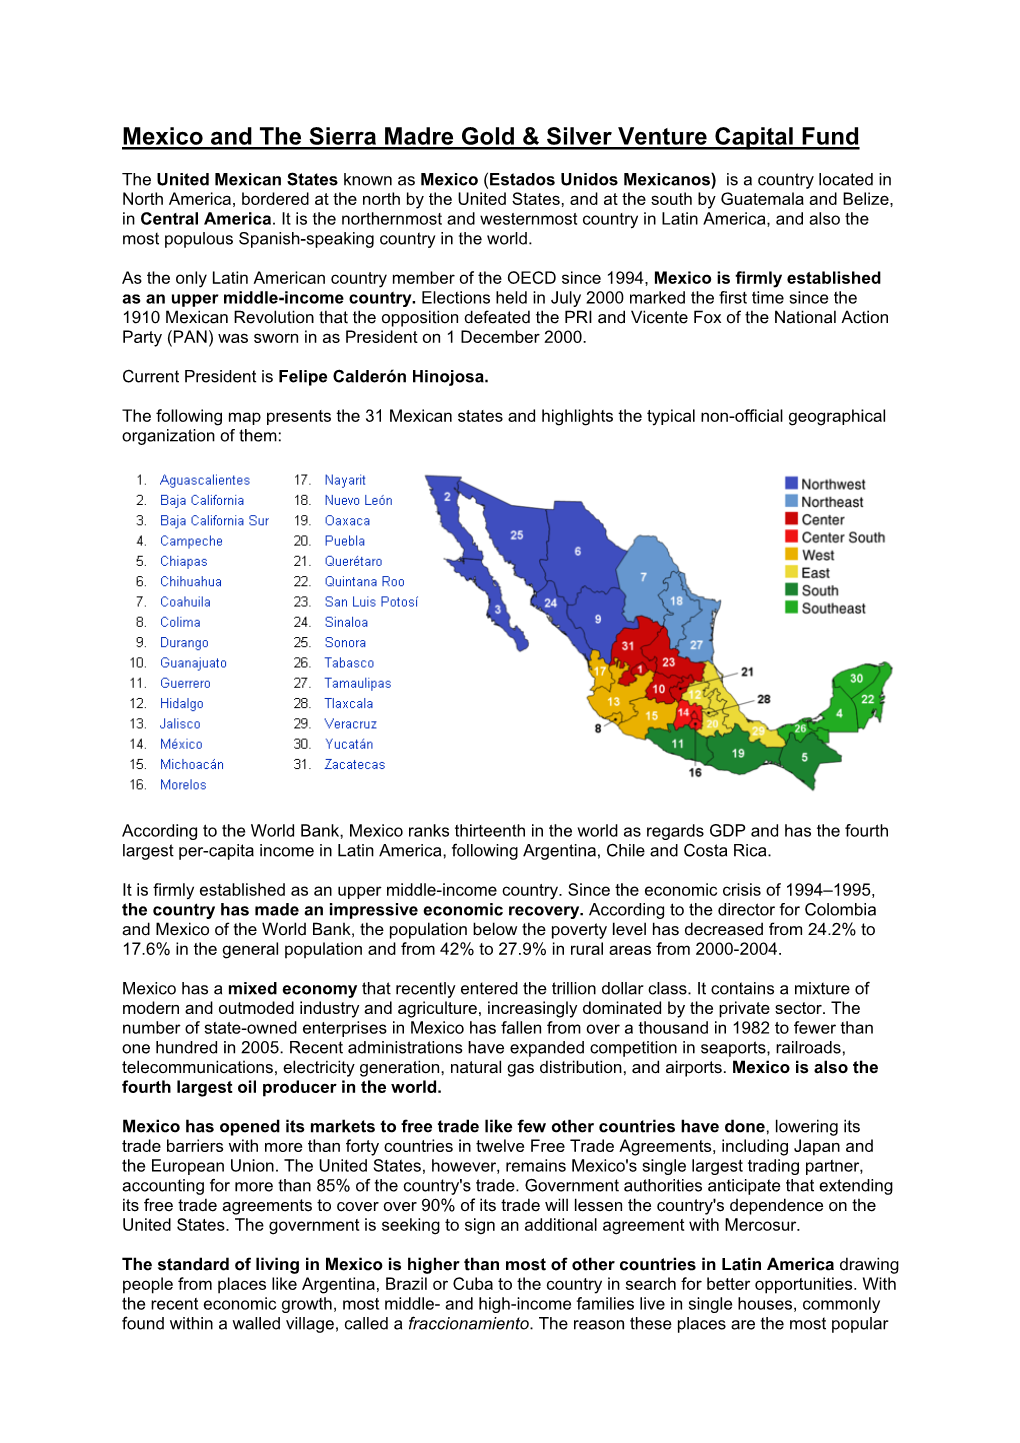 Mexico and the Sierra Madre Gold & Silver Venture Capital Fund